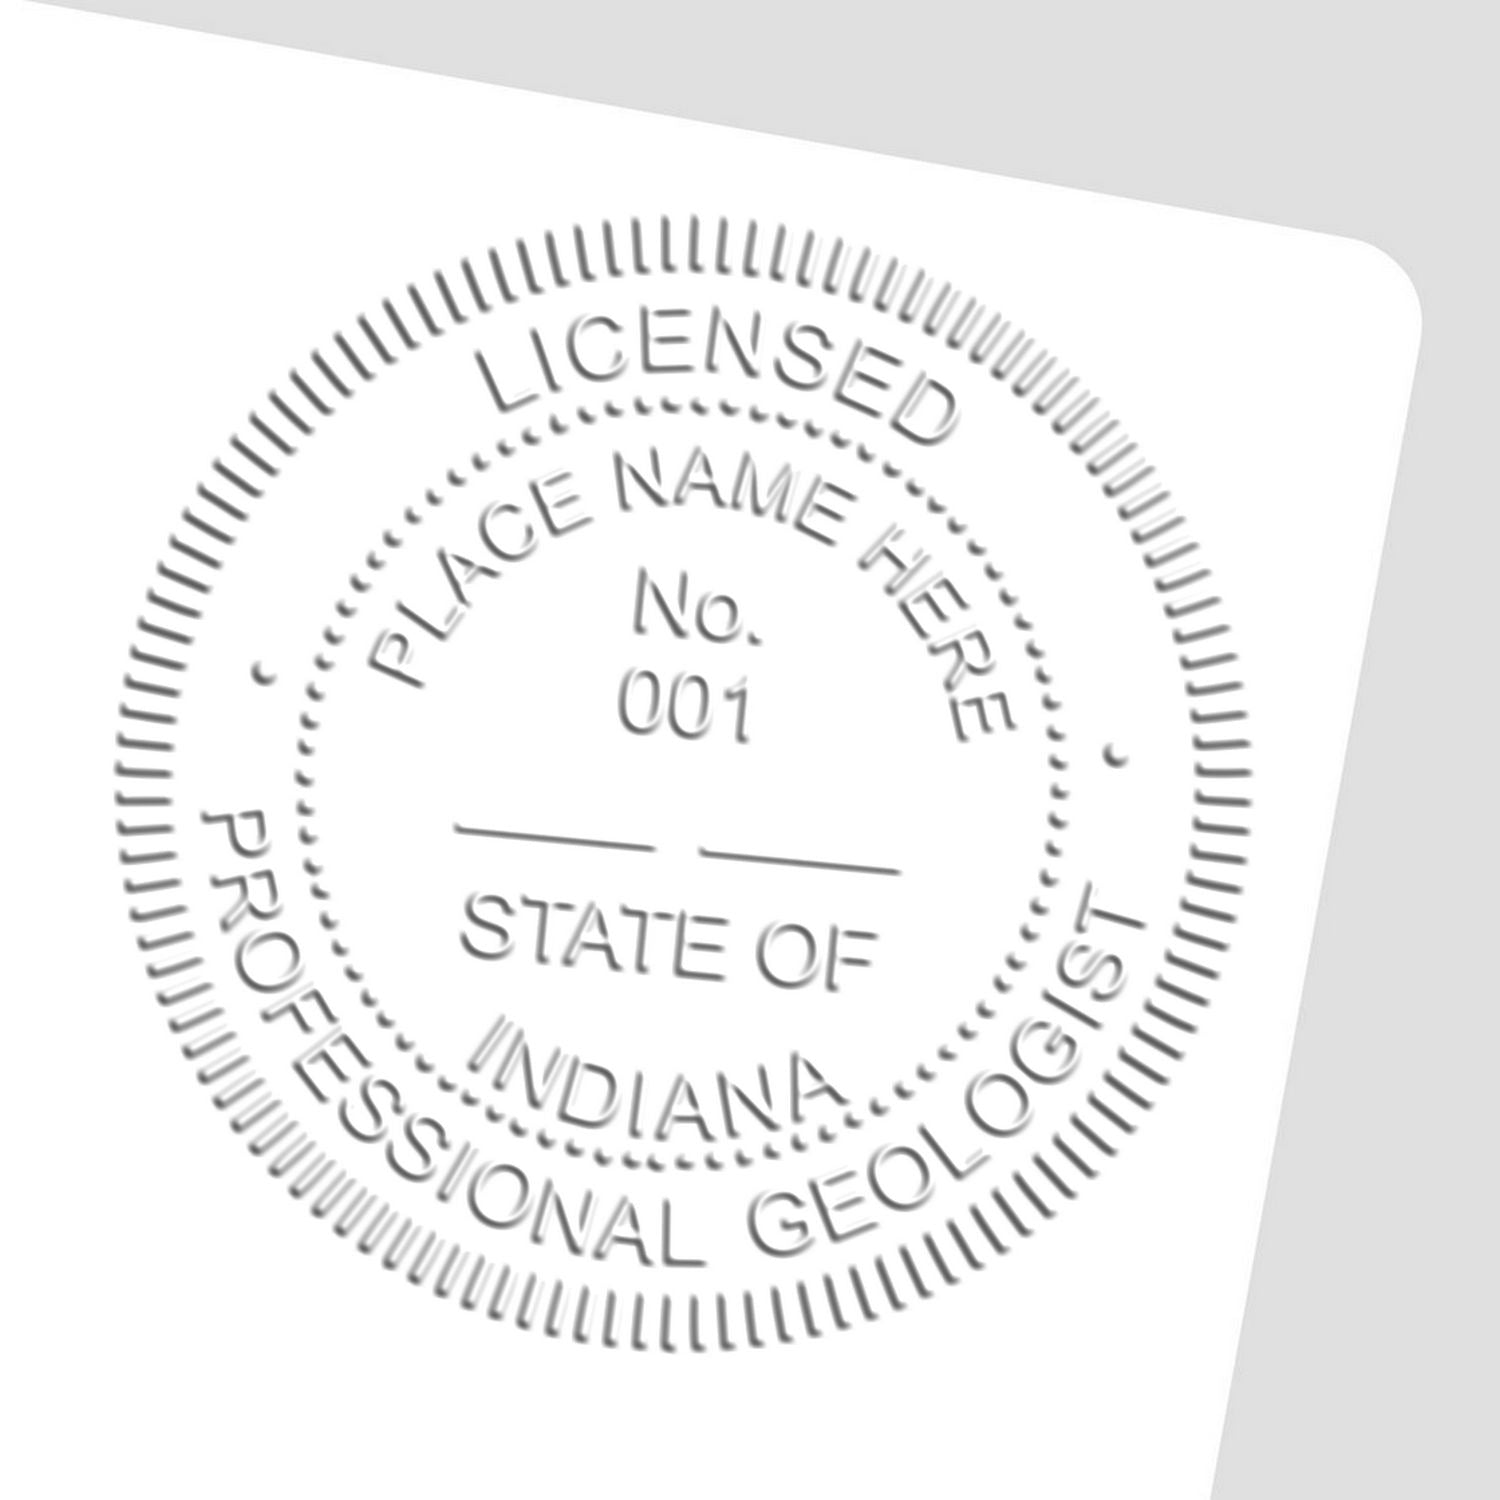 The main image for the Long Reach Indiana Geology Seal depicting a sample of the imprint and imprint sample